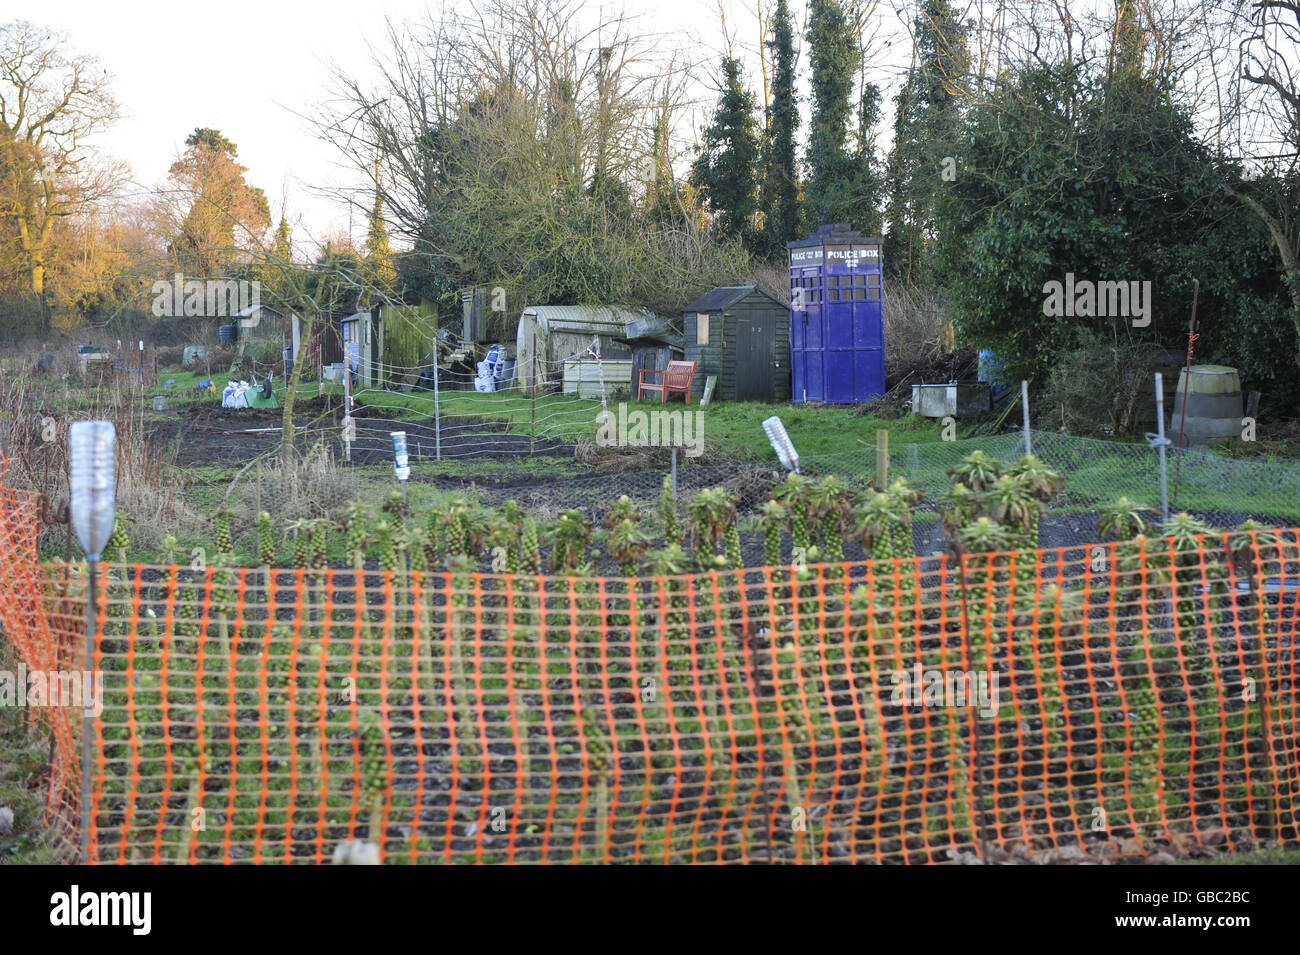 A shed shaped like a TARDIS in an allotment on Quakers Walk allotments, Devizes, Wiltshire belonging to Philippa Morgan and Declan McSweeney. Stock Photo